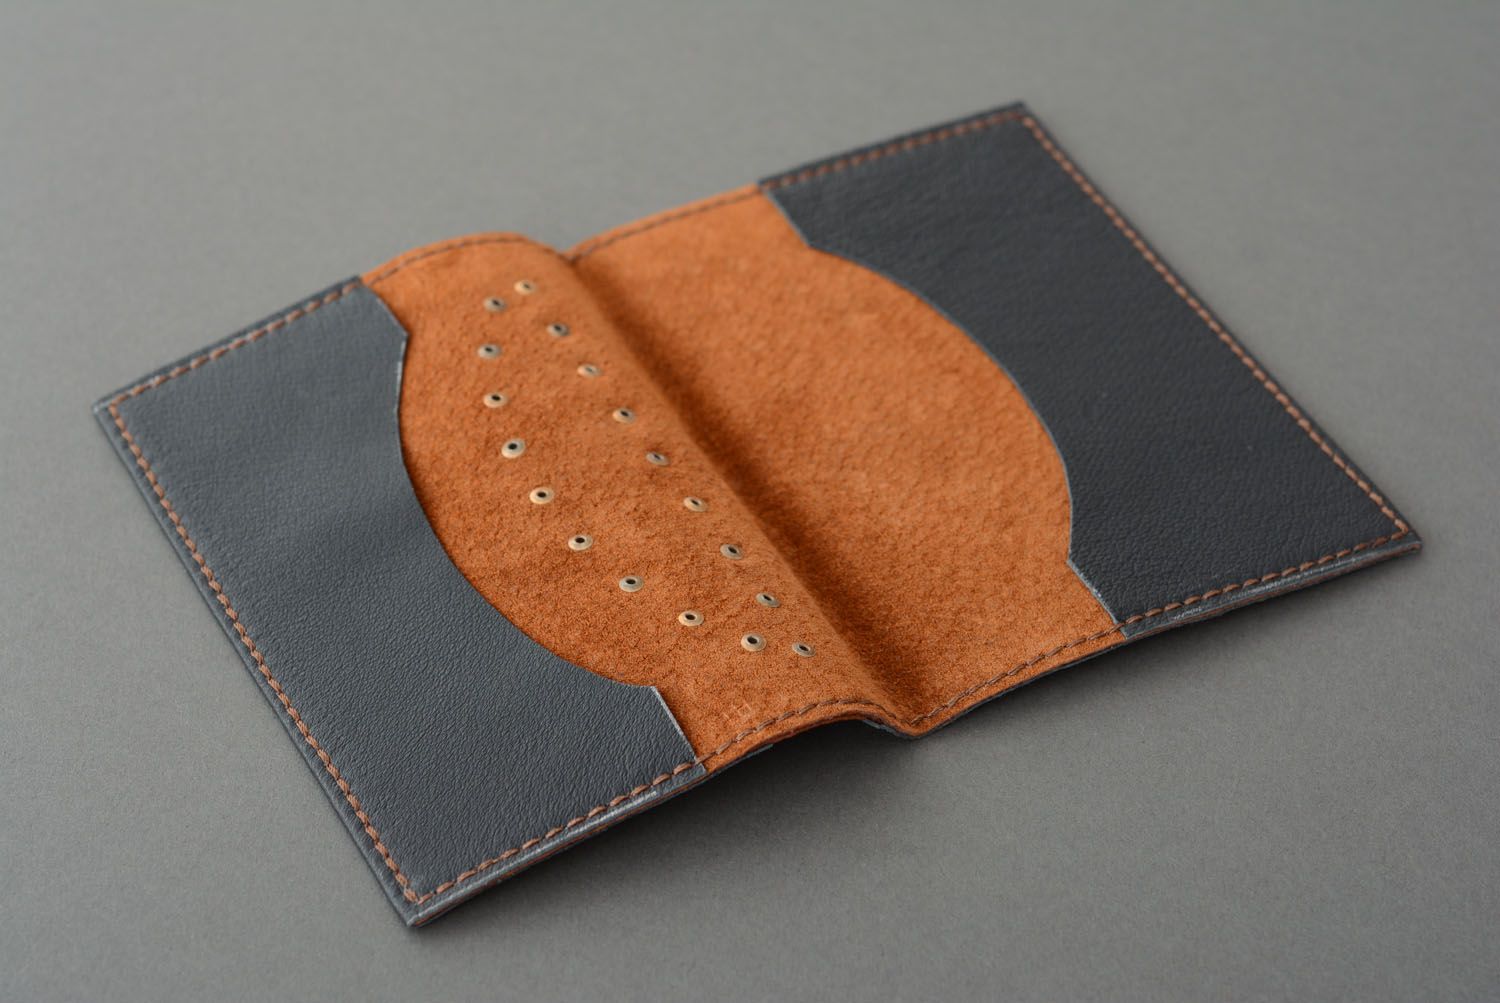 Passport cover made of leather photo 2